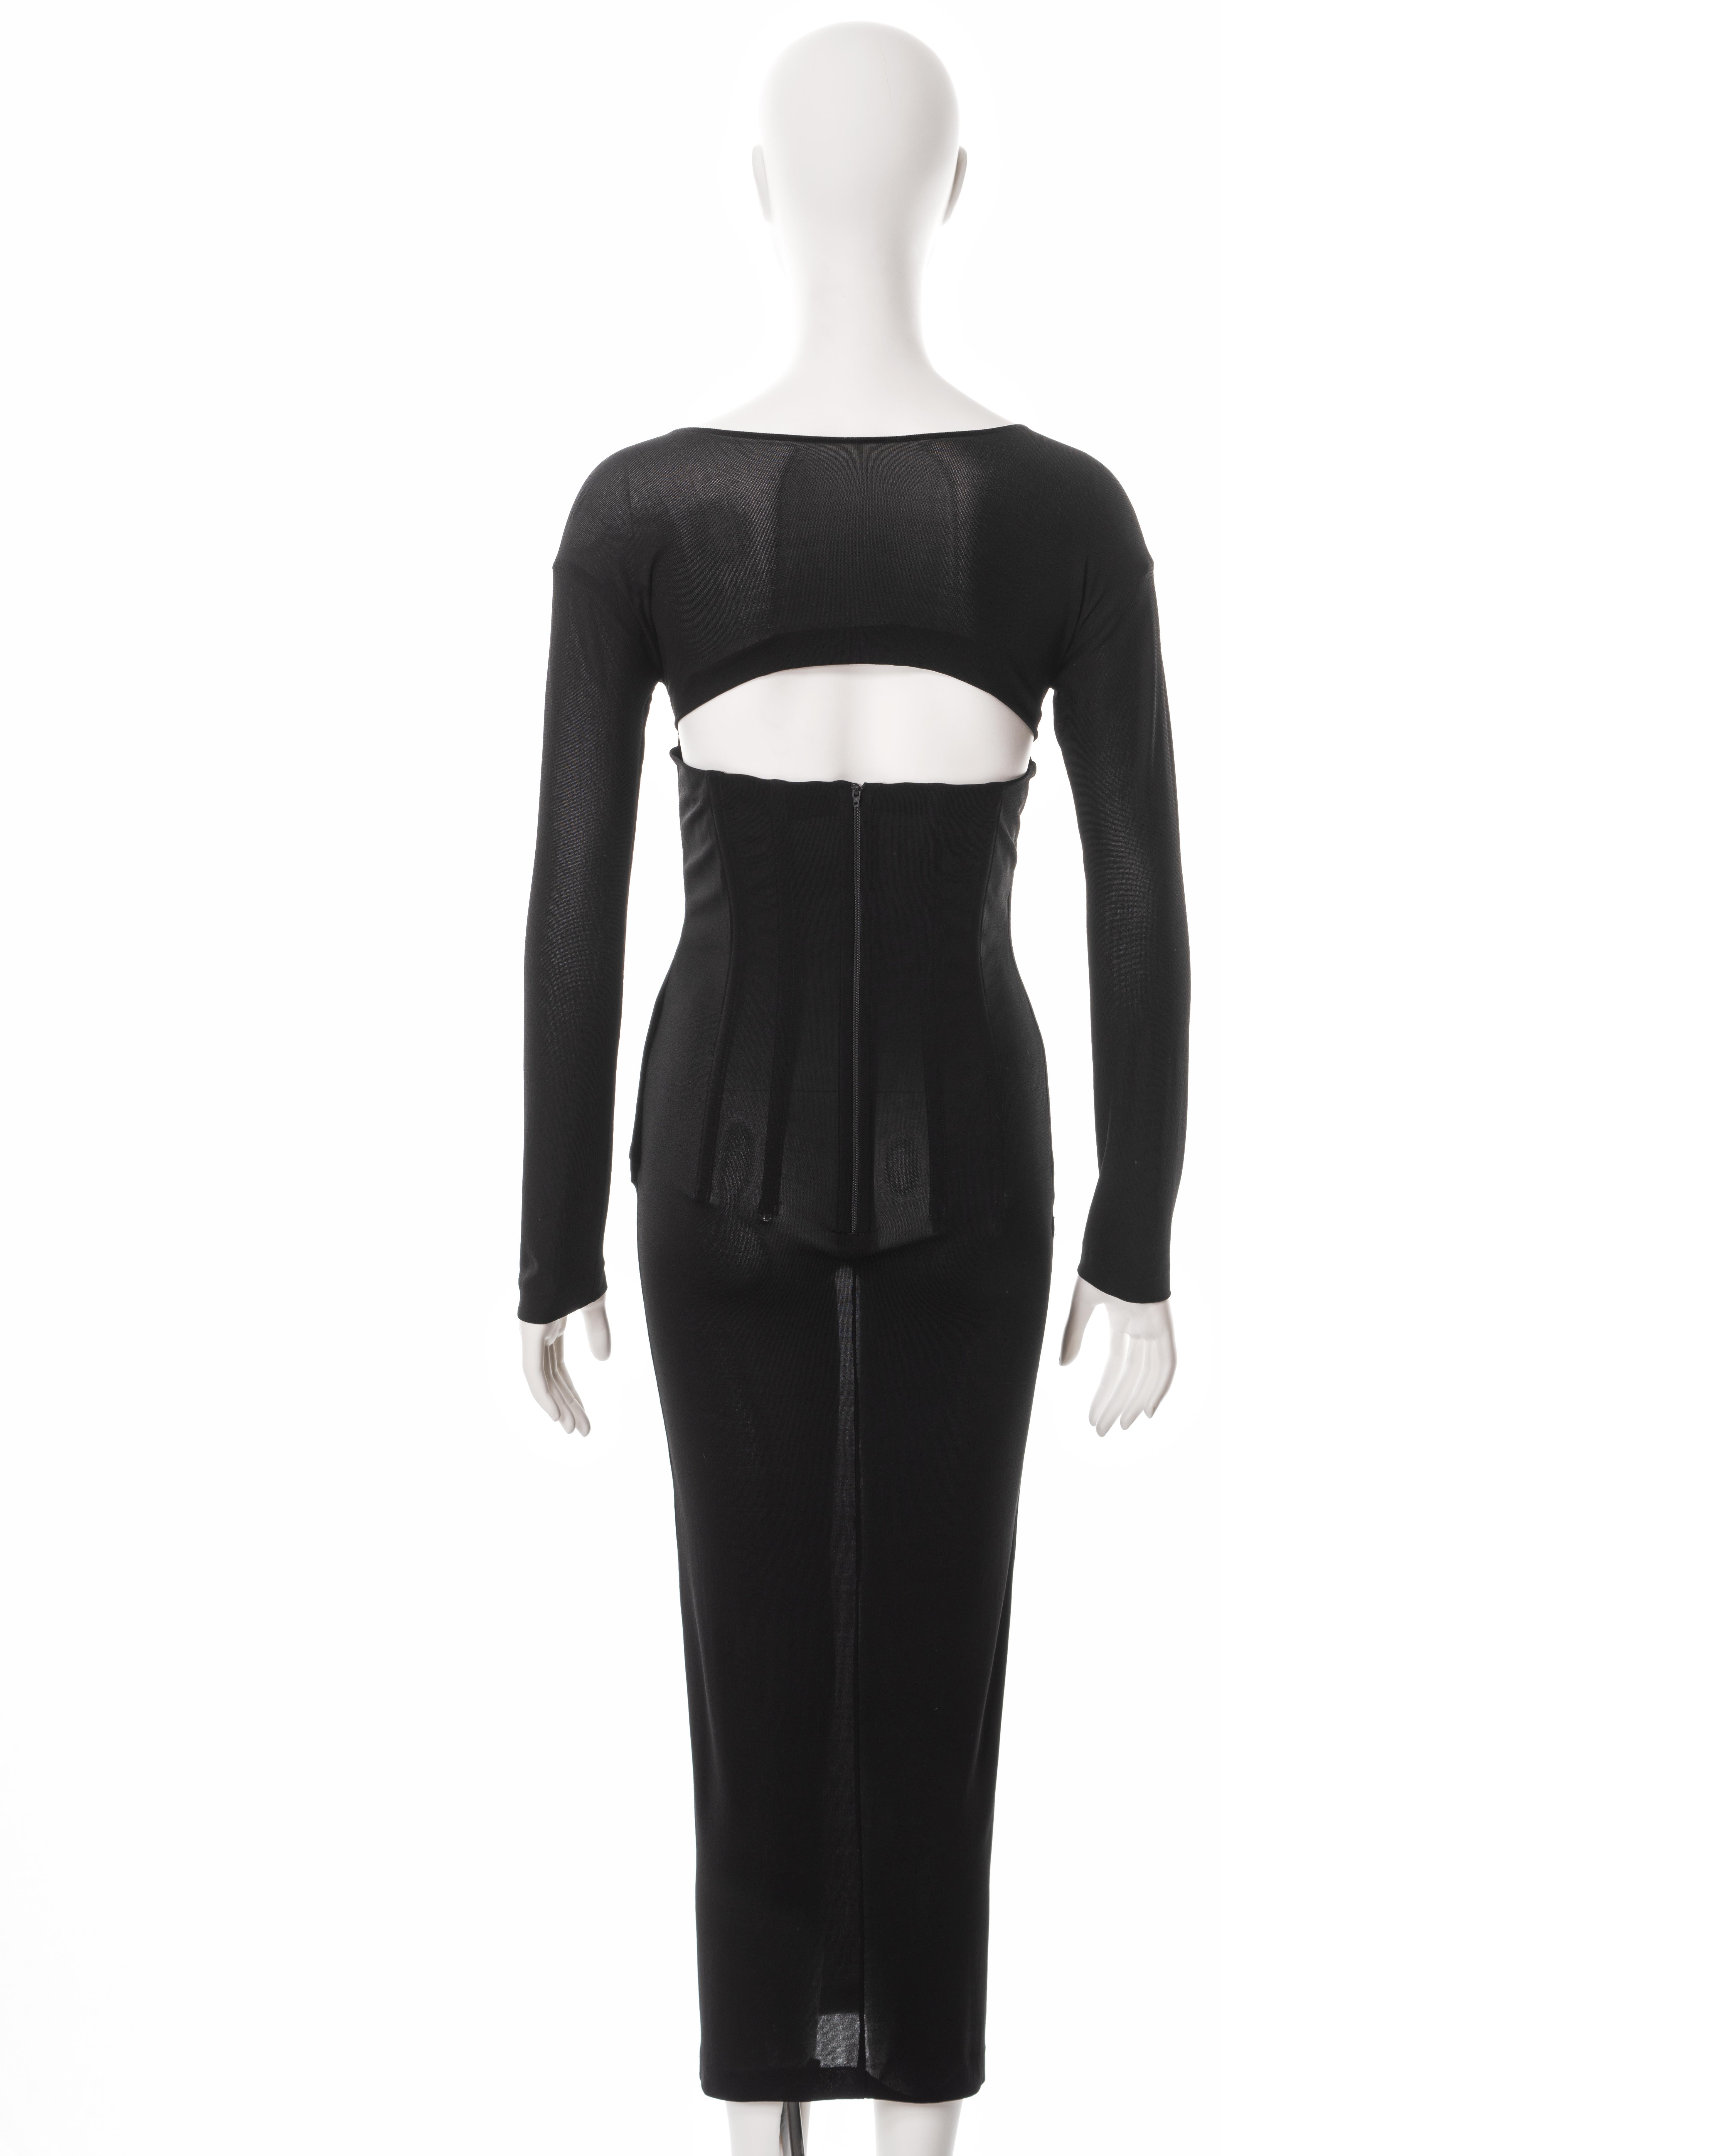 ▪ Dolce & Gabbana black long sleeve evening dress
▪ Spring-Summer 1999
▪ Constructed from a black semi-sheer viscose-lycra mix jersey 
▪ Built-in corset bones 
▪ Long fitted sleeves
▪ Scoop neck 
▪ Centre-back zipper 
▪ Cut-out at the back
▪